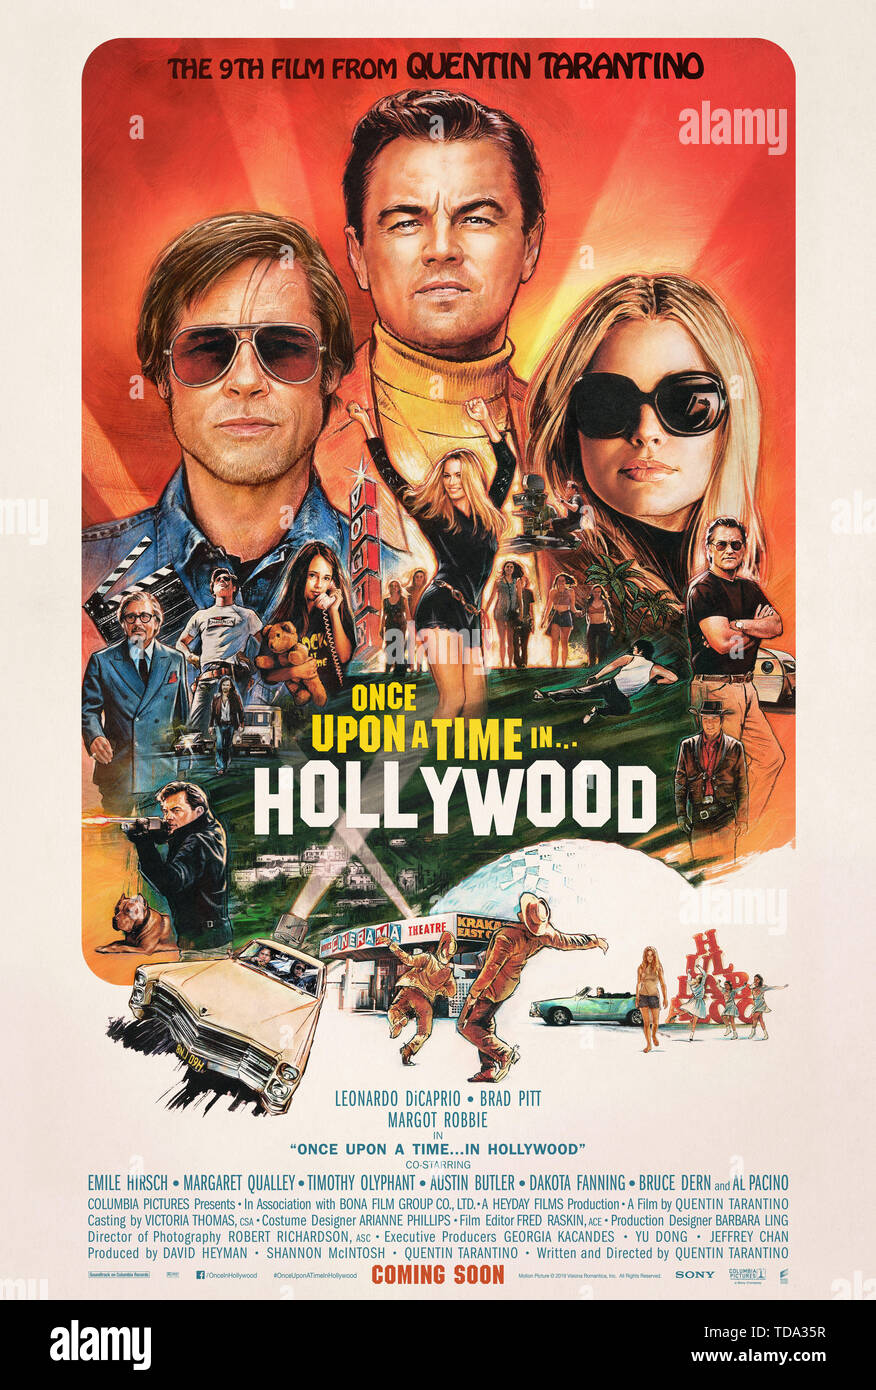 RELEASE DATE: August 9, 2019 TITLE: Once Upon a Time in Hollywood STUDIO: Columbia Pictures DIRECTOR: Quentin Tarantino PLOT: A TV actor and his stunt double embark on an odyssey to make a name for themselves in the film industry during the Charles Manson murders in 1969 Los Angeles. STARRING: MARGOT ROBBIE as Sharon Tate, Brad Pitt as Cliff Booth, Leonardo Dicaprio as Rick Dalton Poster art. (Credit Image: © Columbia Pictures/Entertainment Pictures) Stock Photo